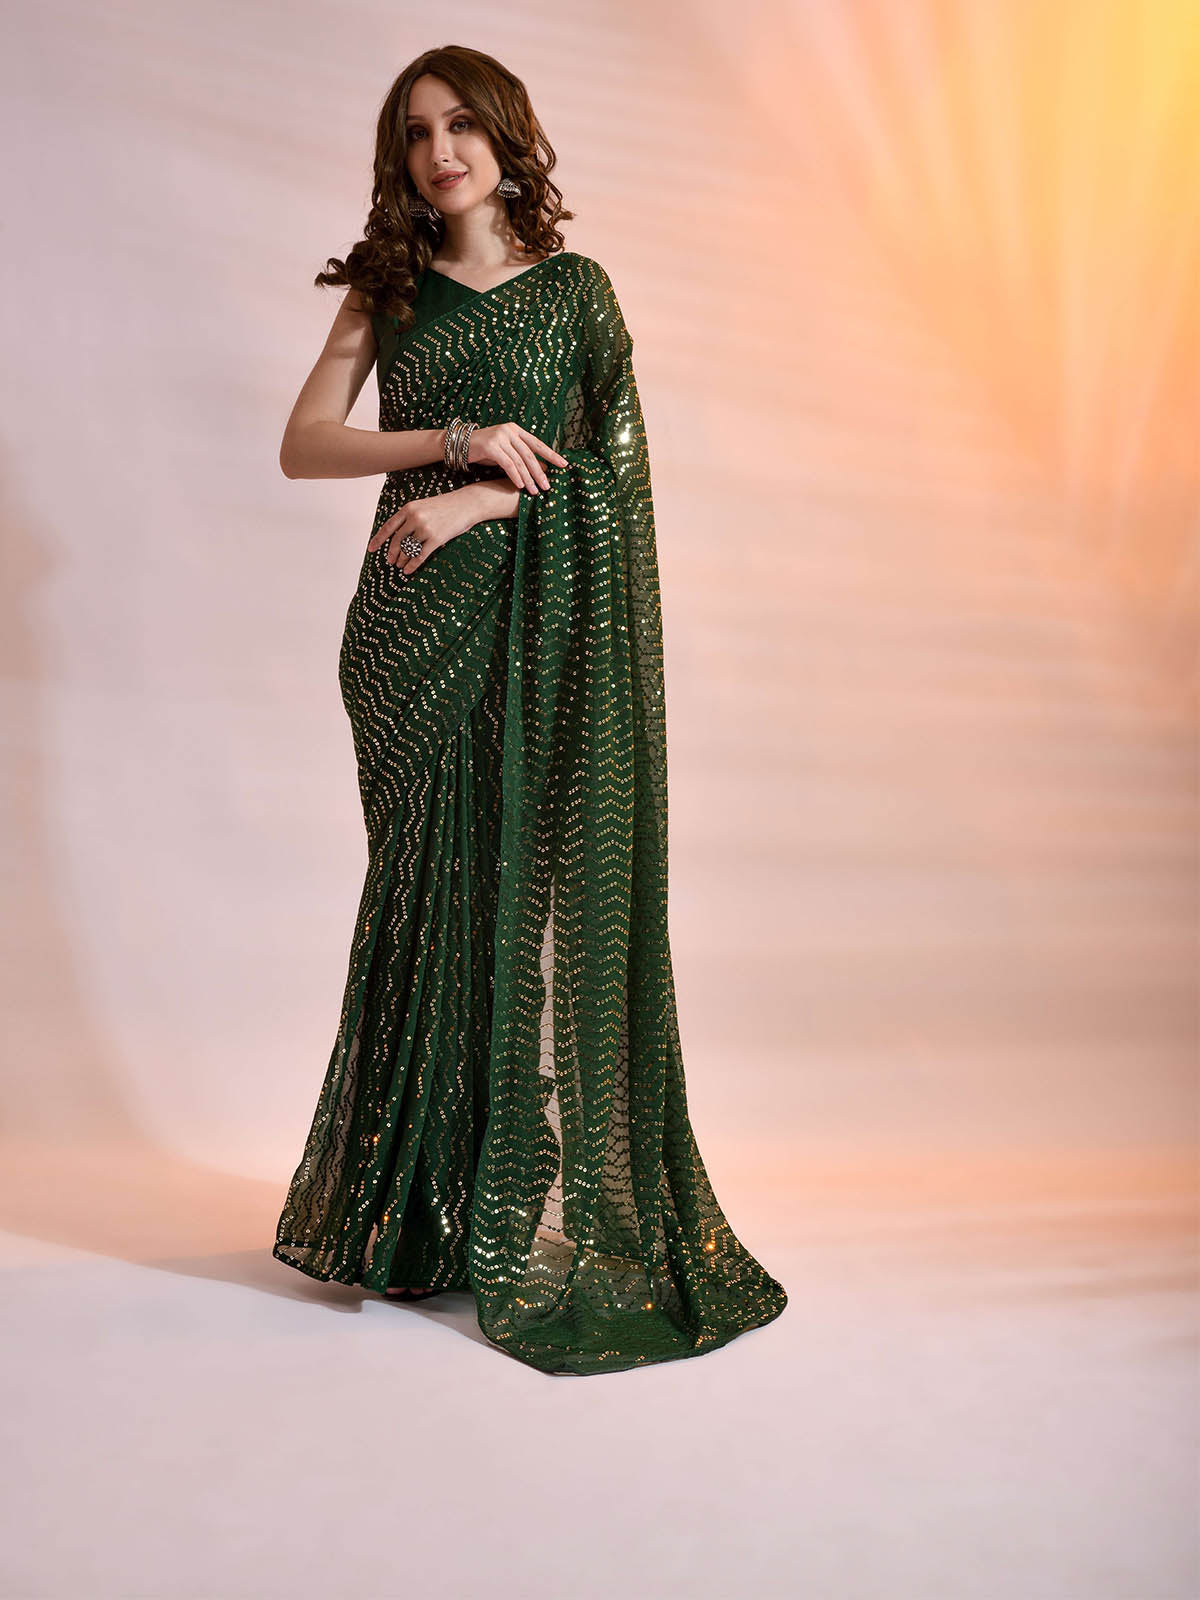 Buy Green Georgette Saree With Blouse Online. – Odette